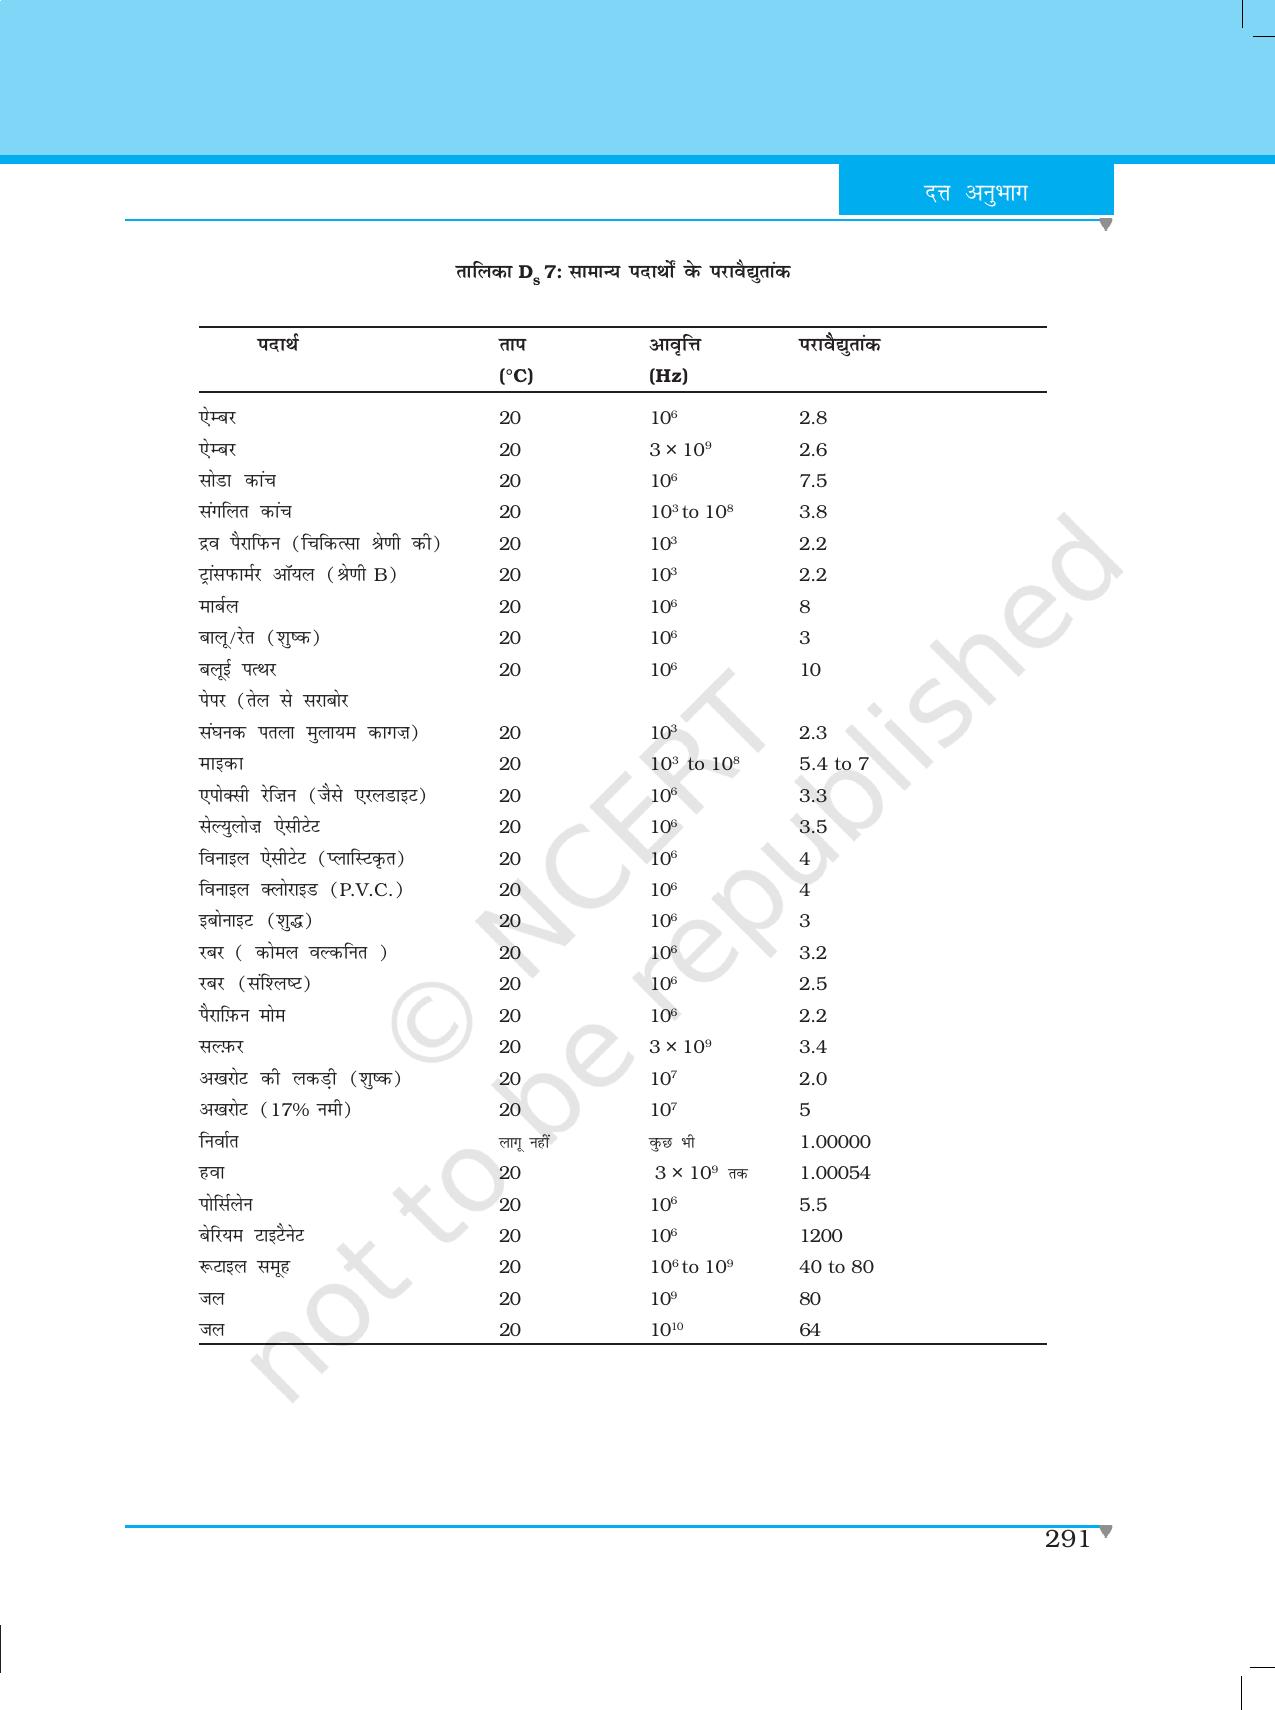 NCERT Laboratory Manuals for Class XII भौतिकी - दत्त अनुभाग - Page 4